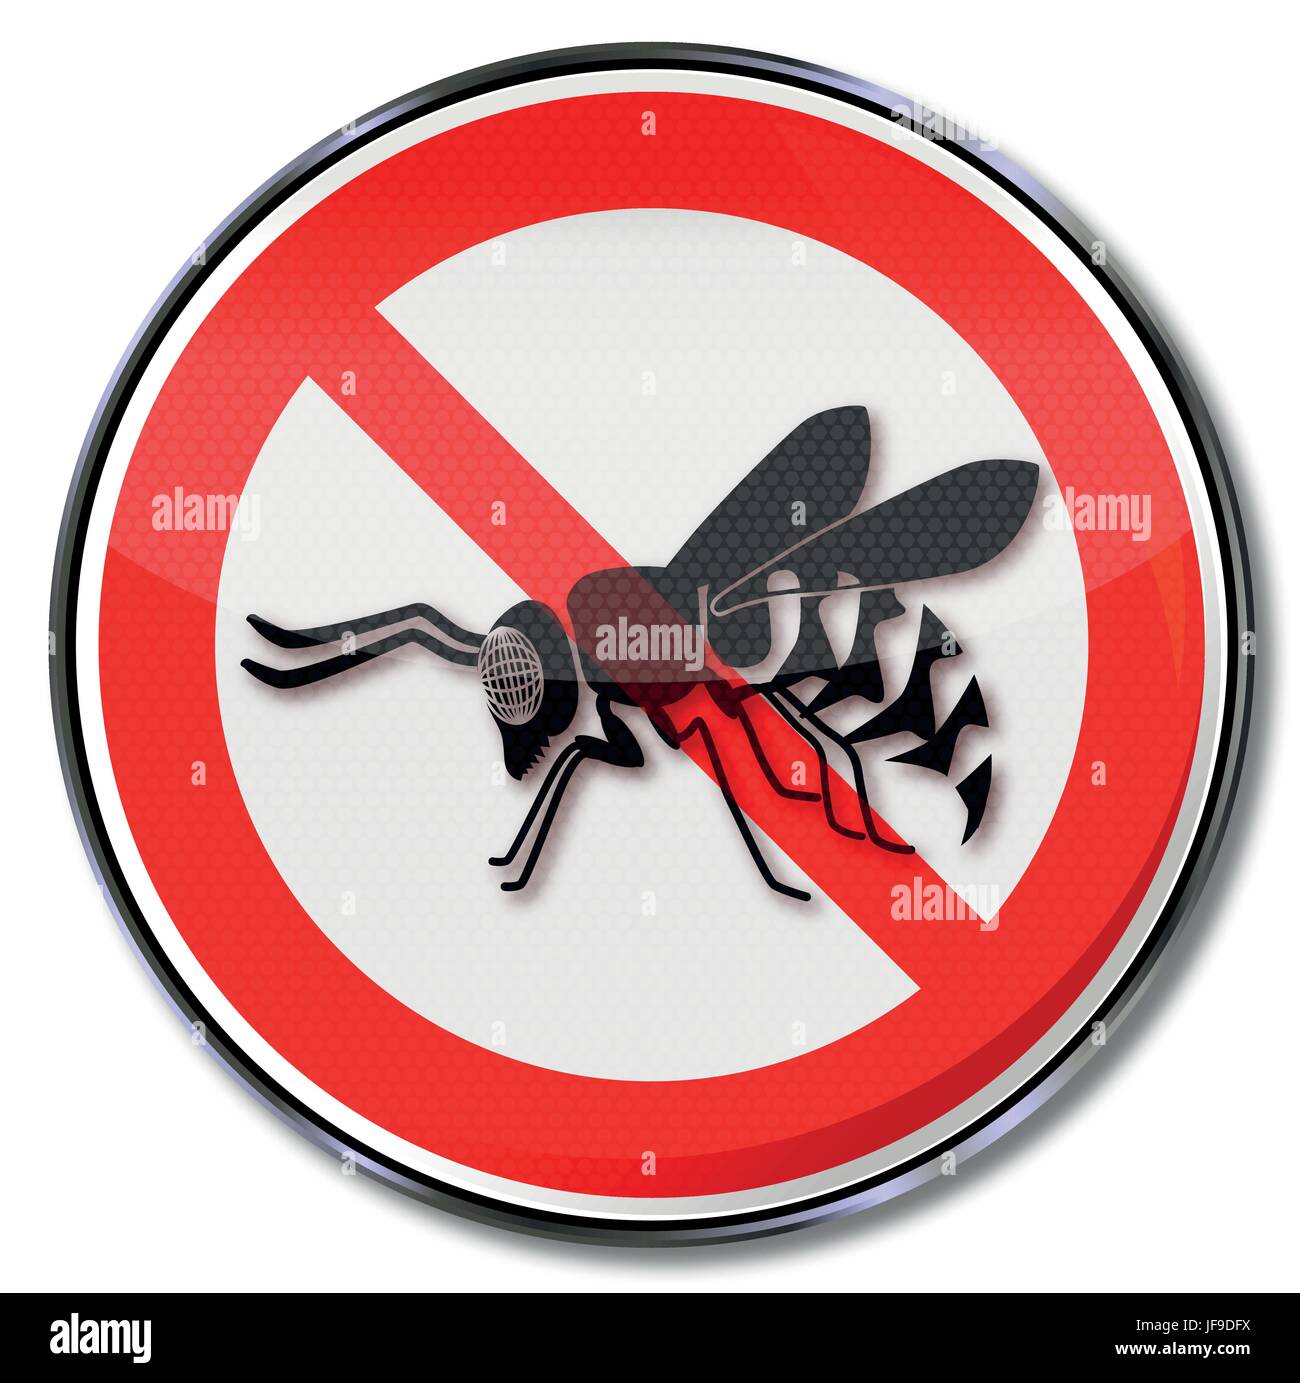 insect, wasp, ban, malaria, legs, insect, accident, fear, wasp, sting, victim, Stock Vector